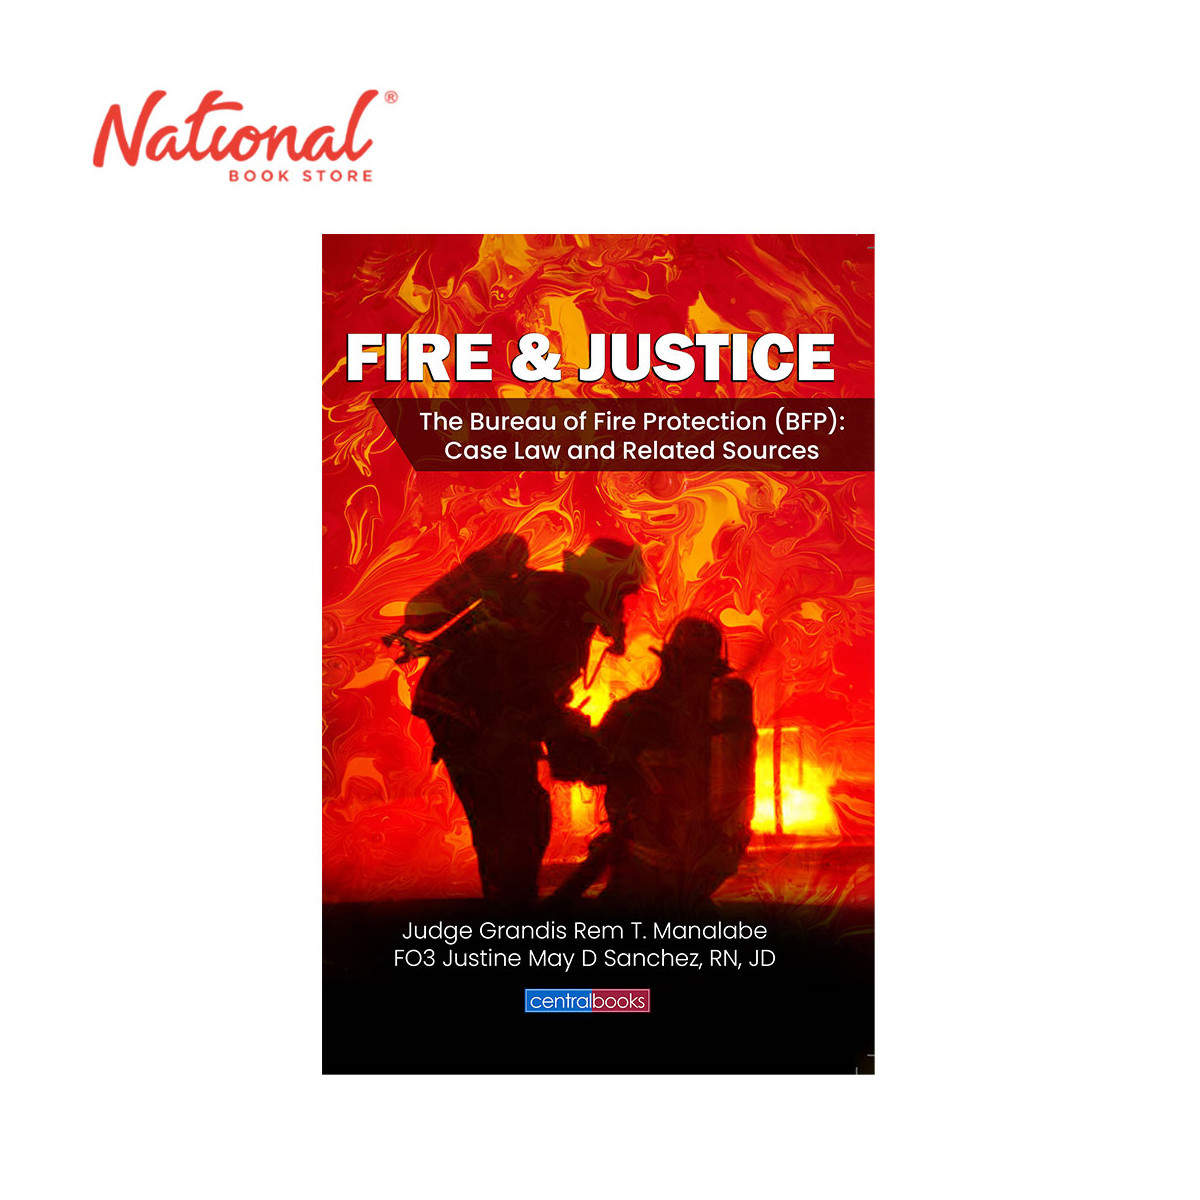 Fire & Justice by Judge Grandis Rem Manalabe and FO3 Justine May Sanchez, RN, JD - Trade Paperback